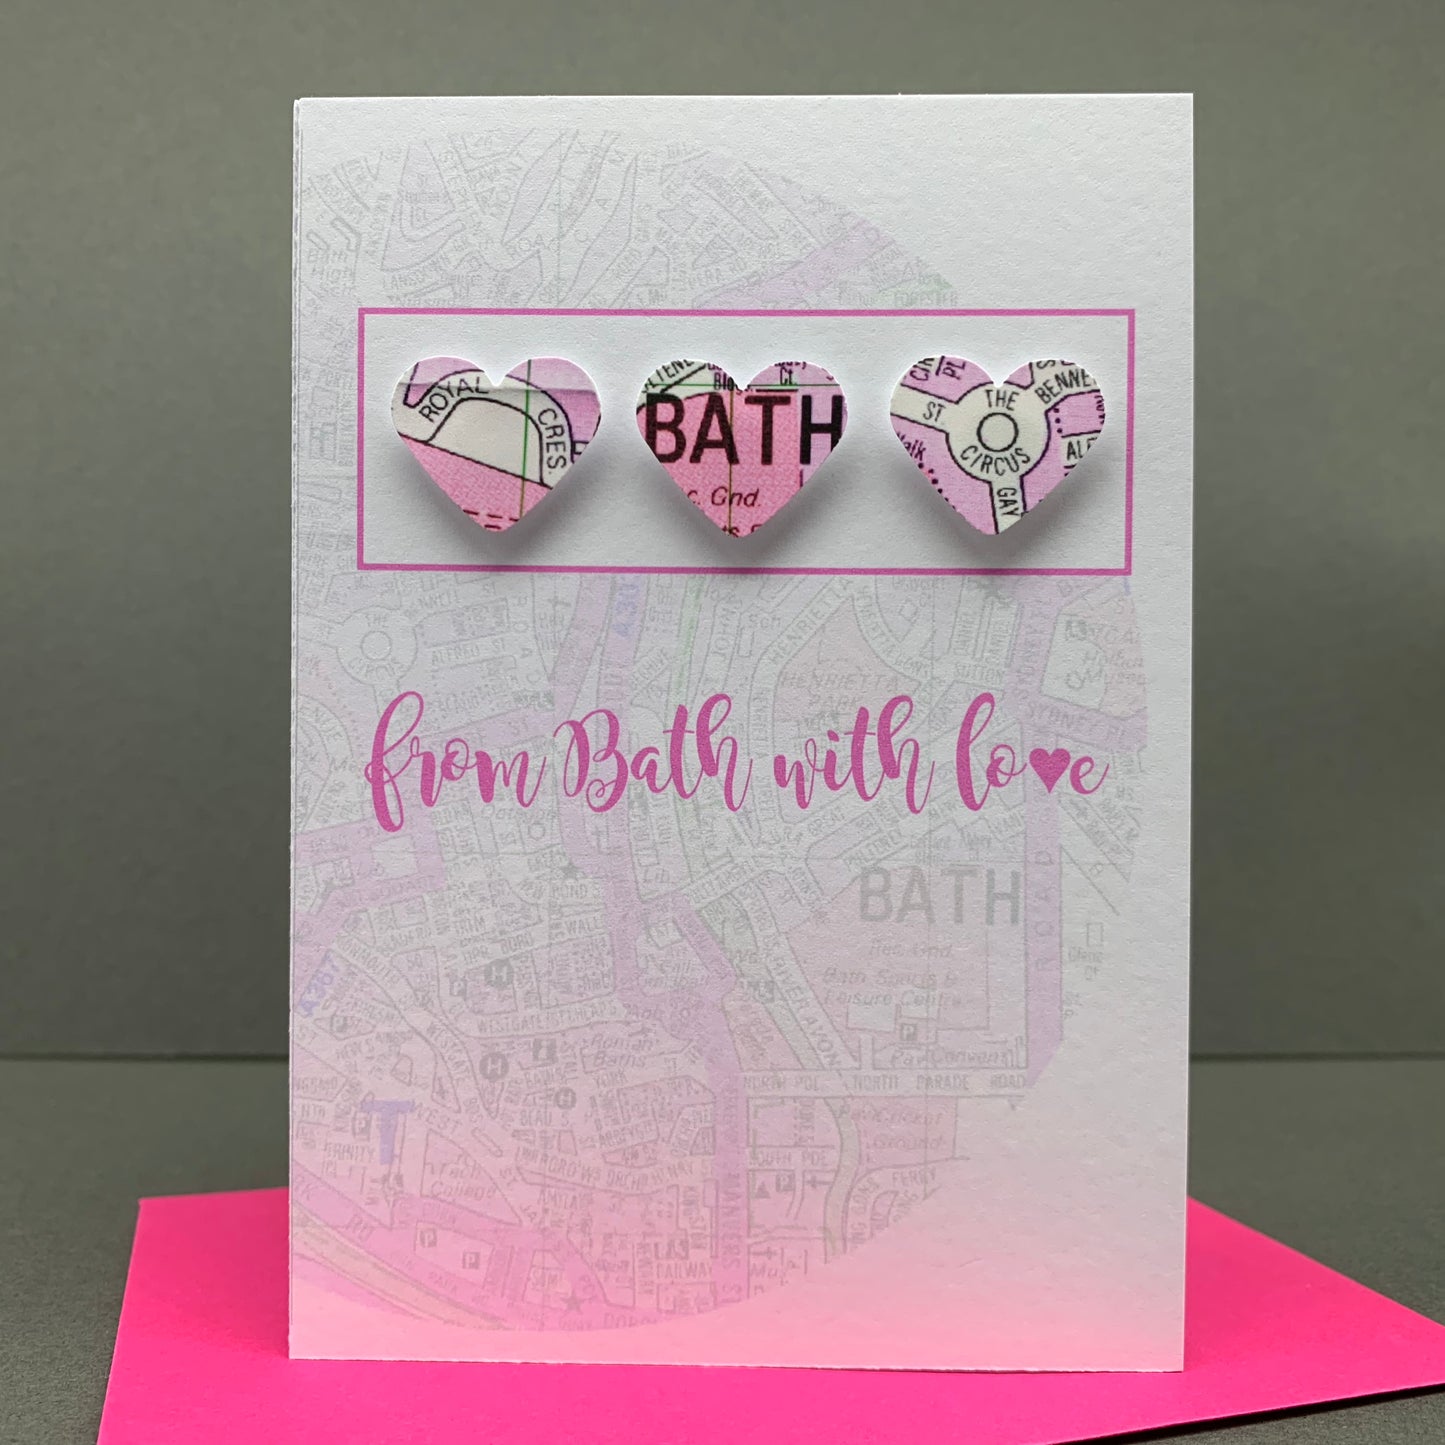 From Bath with love